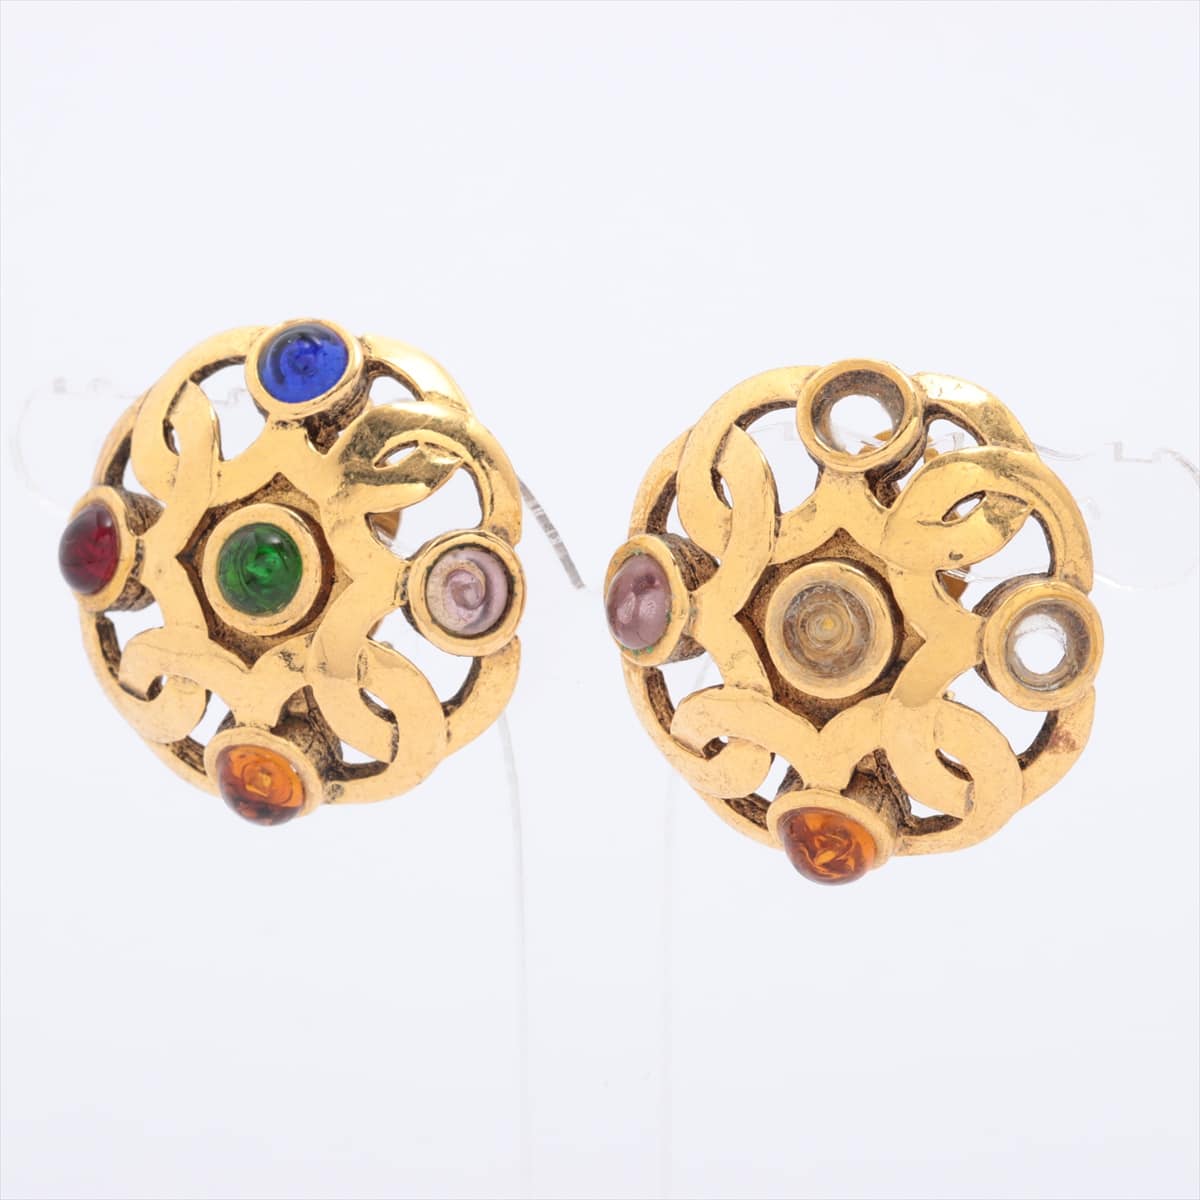 Chanel Coco Mark 2 5 Earrings (for both ears) GP Gold Color stone